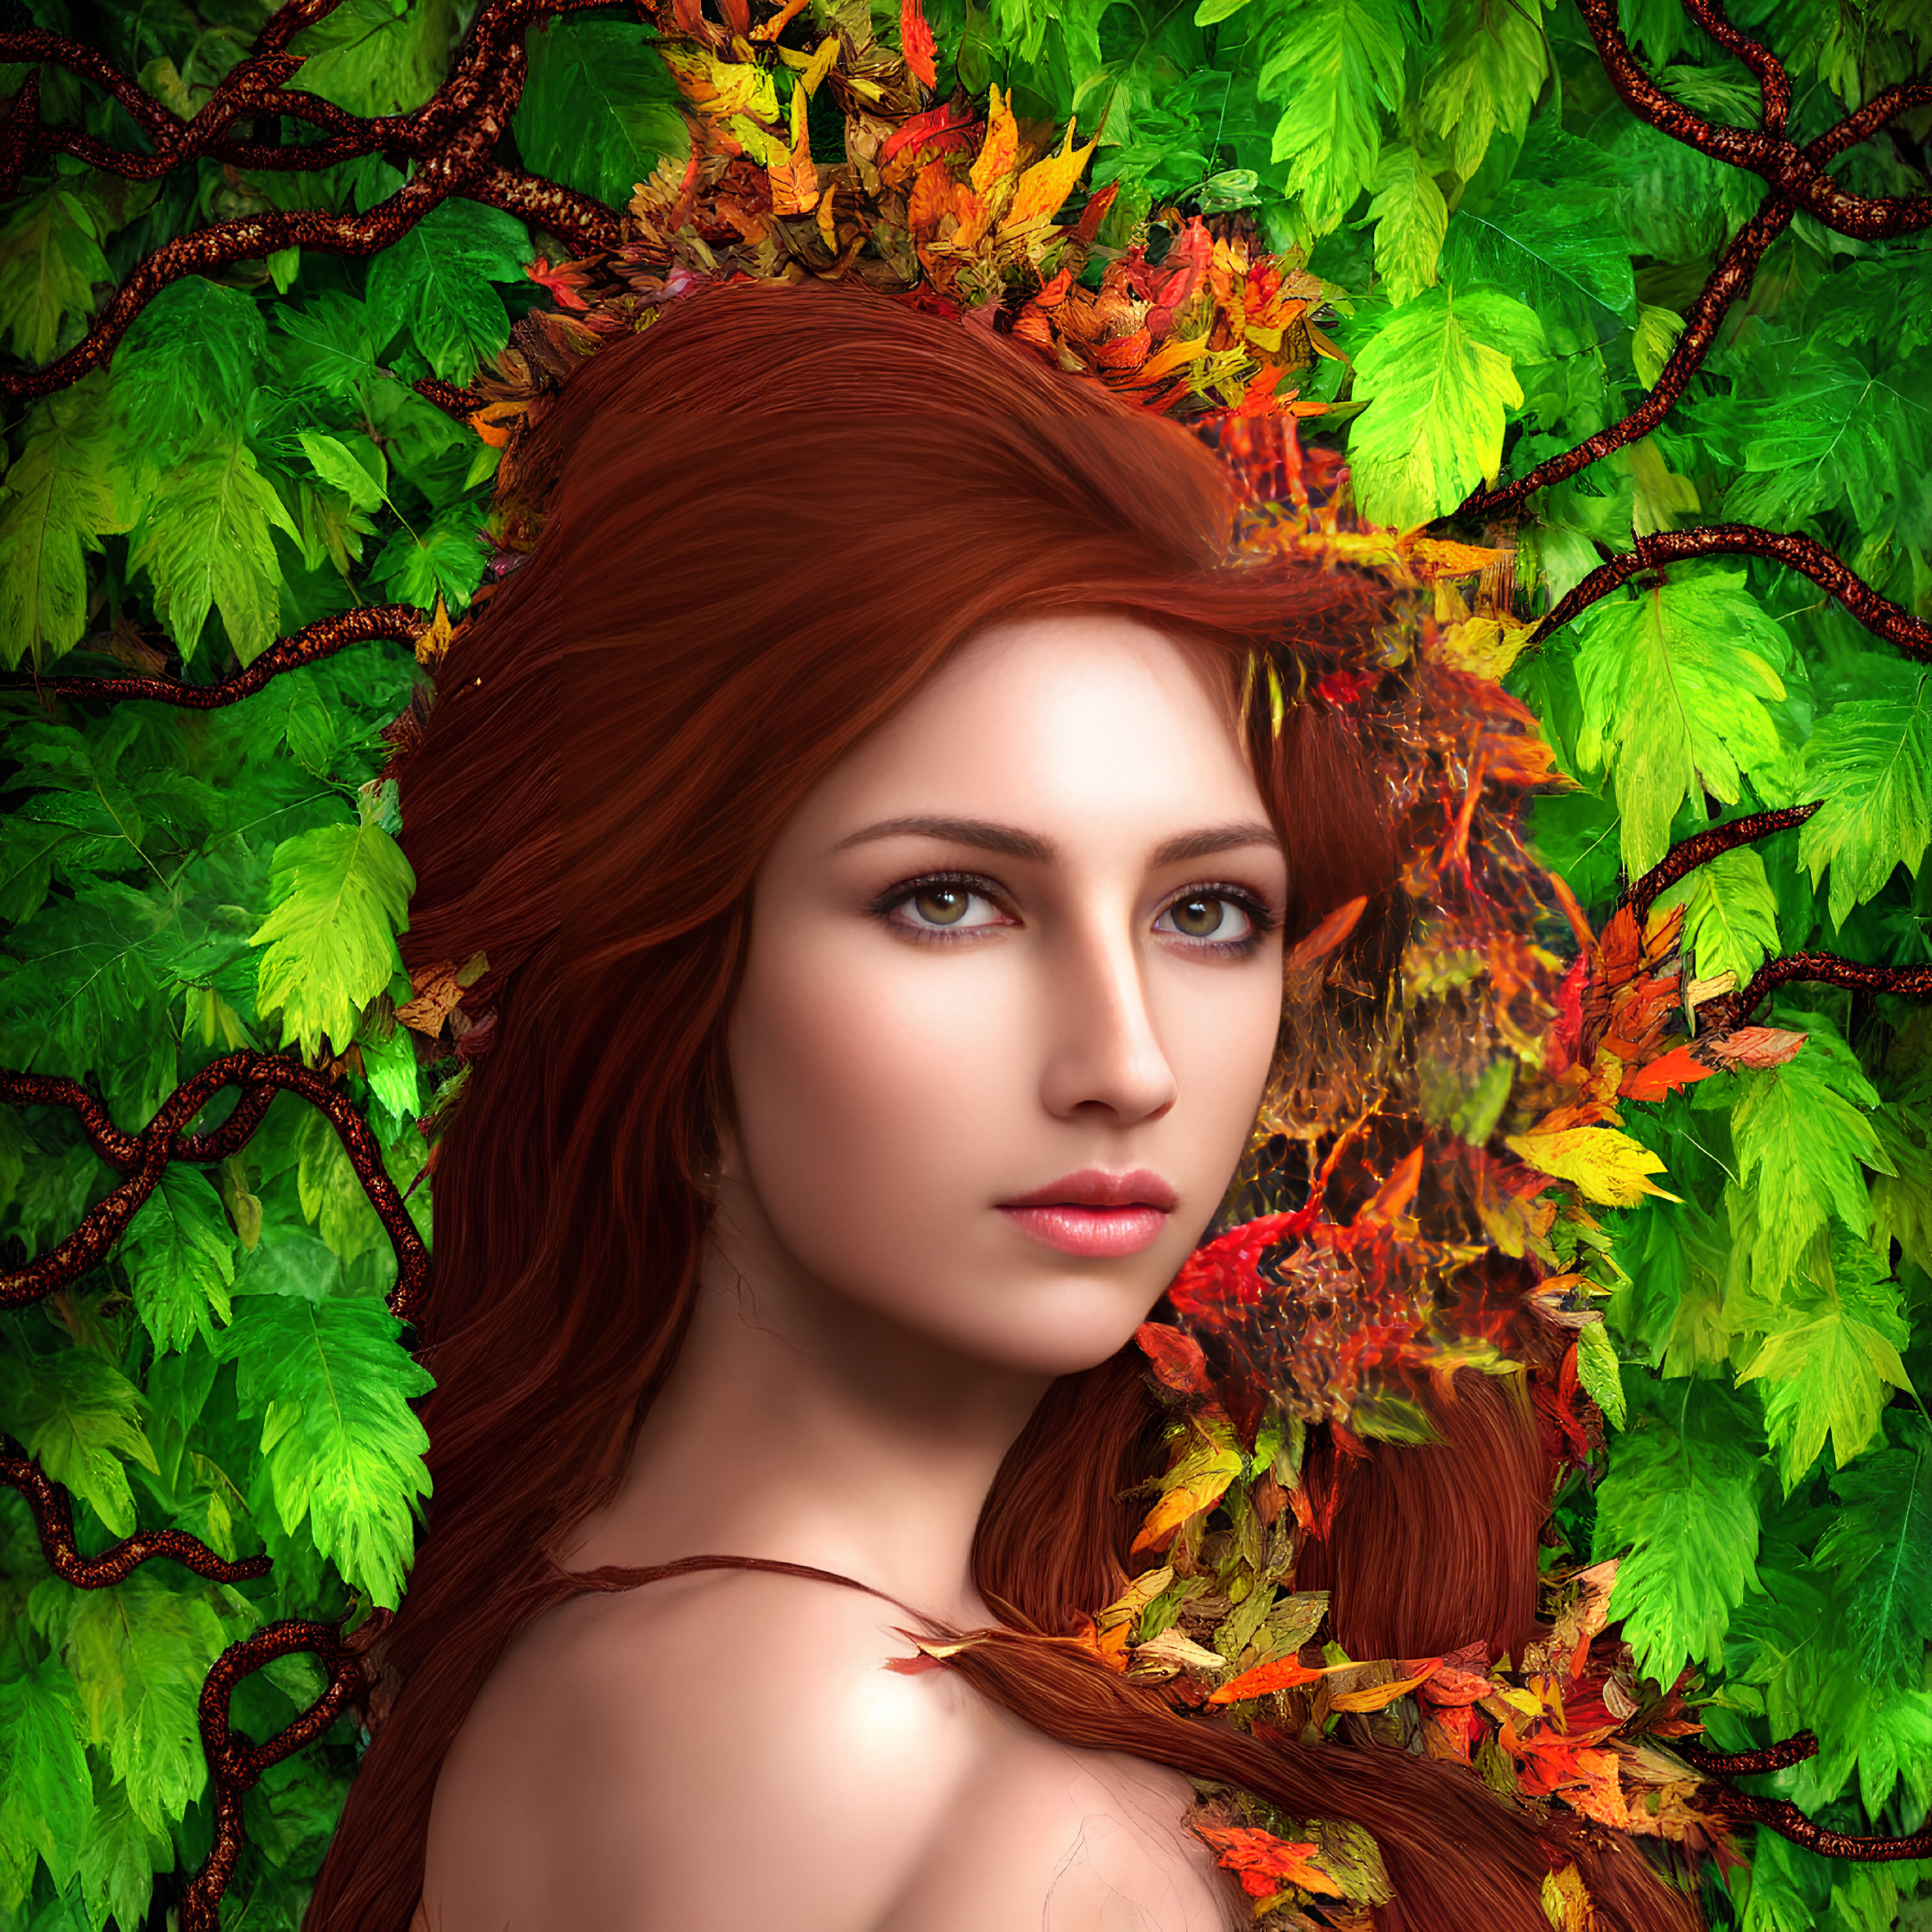 Digital portrait: Woman with red hair in nature setting